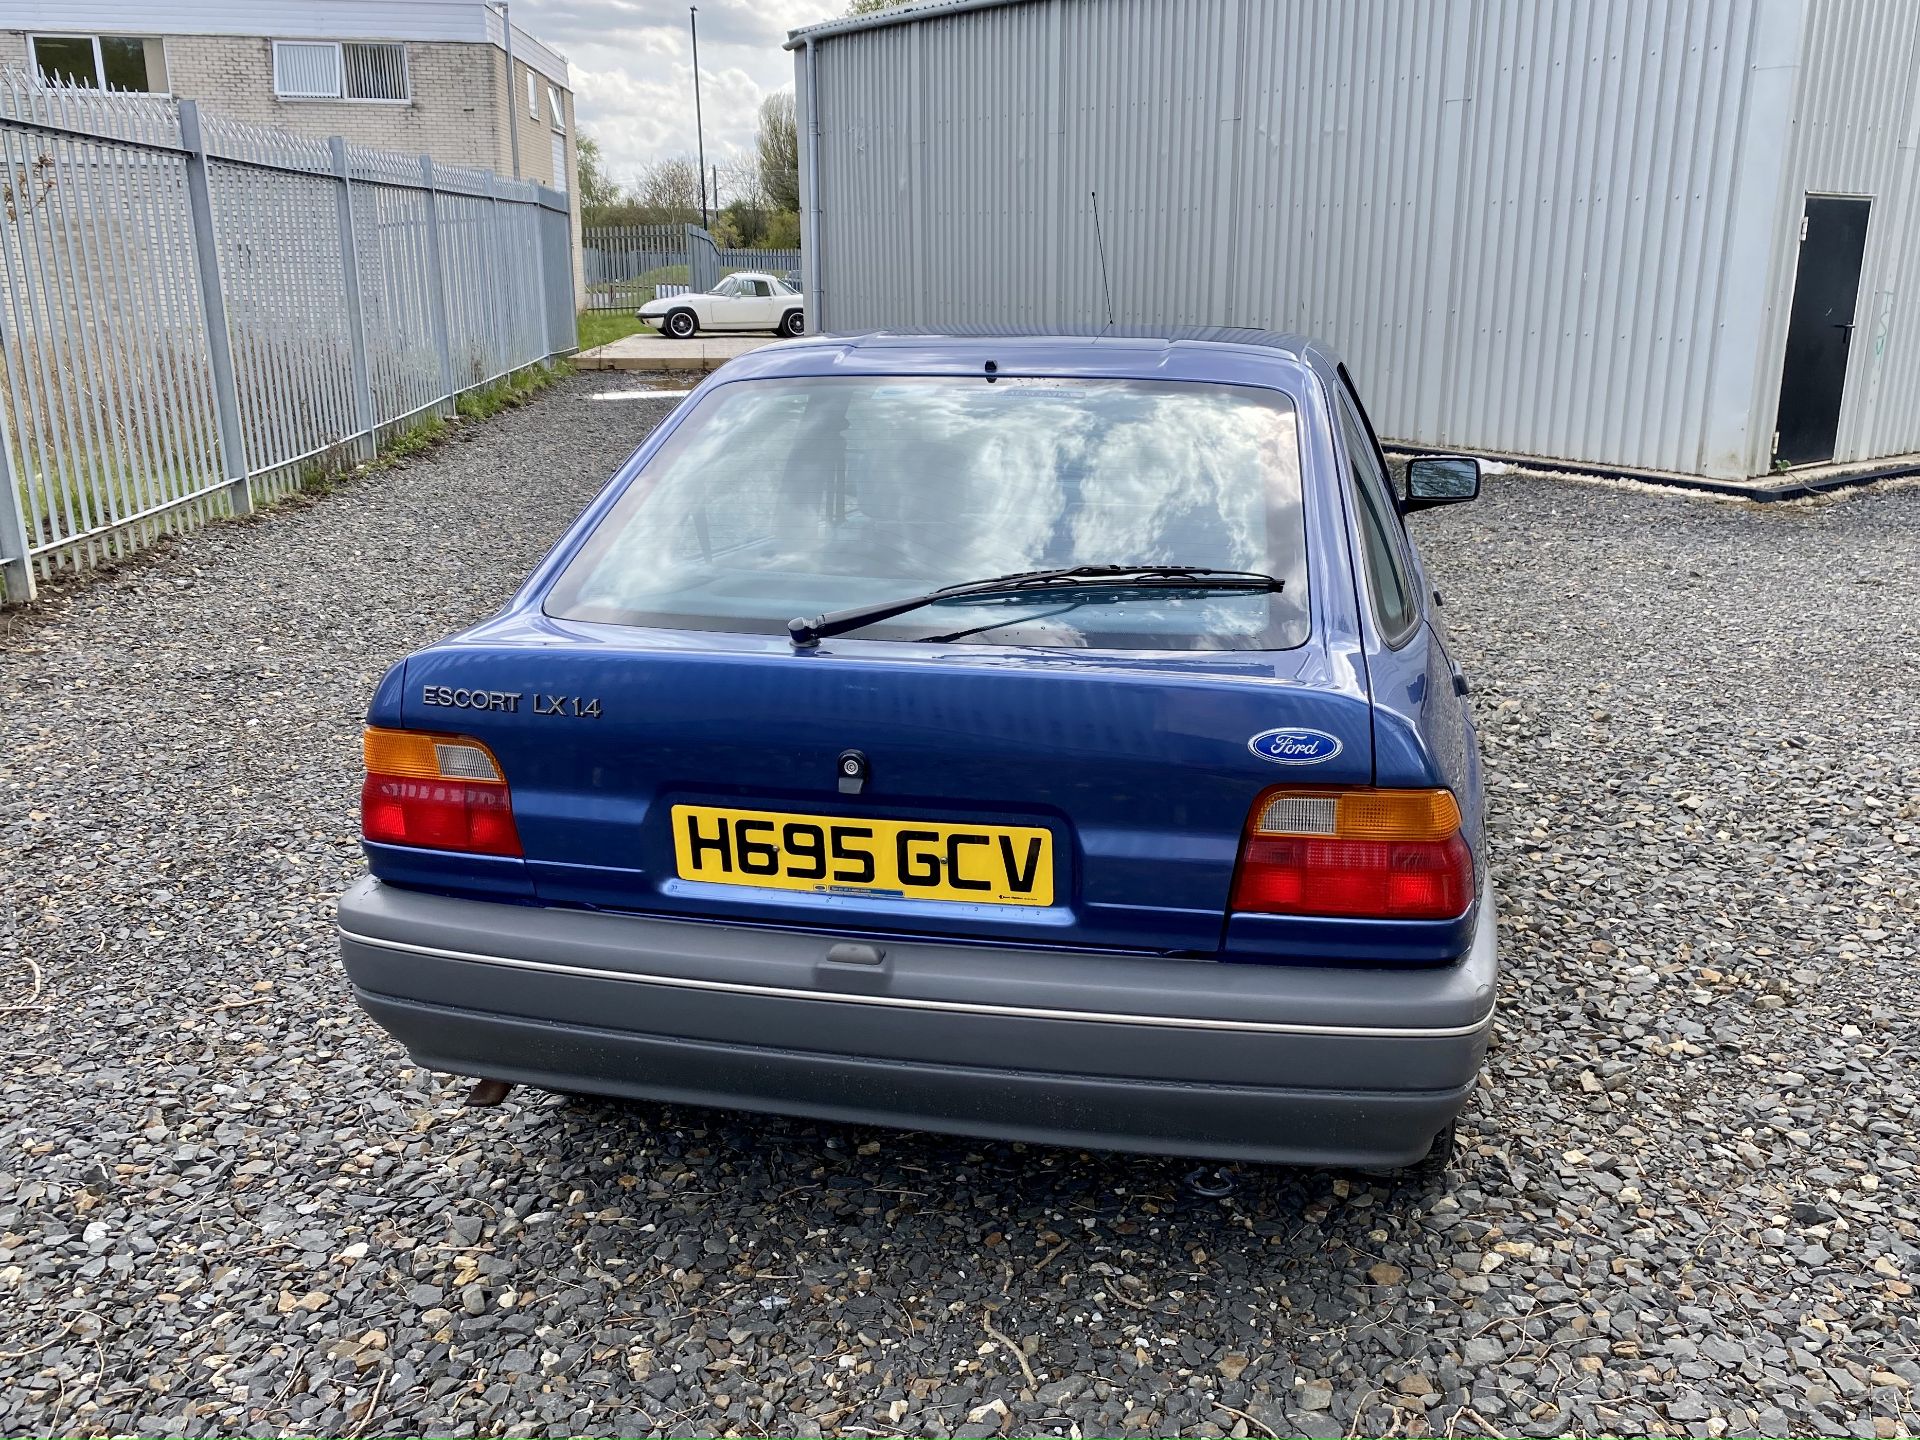 Ford Escort LX  - Image 10 of 54